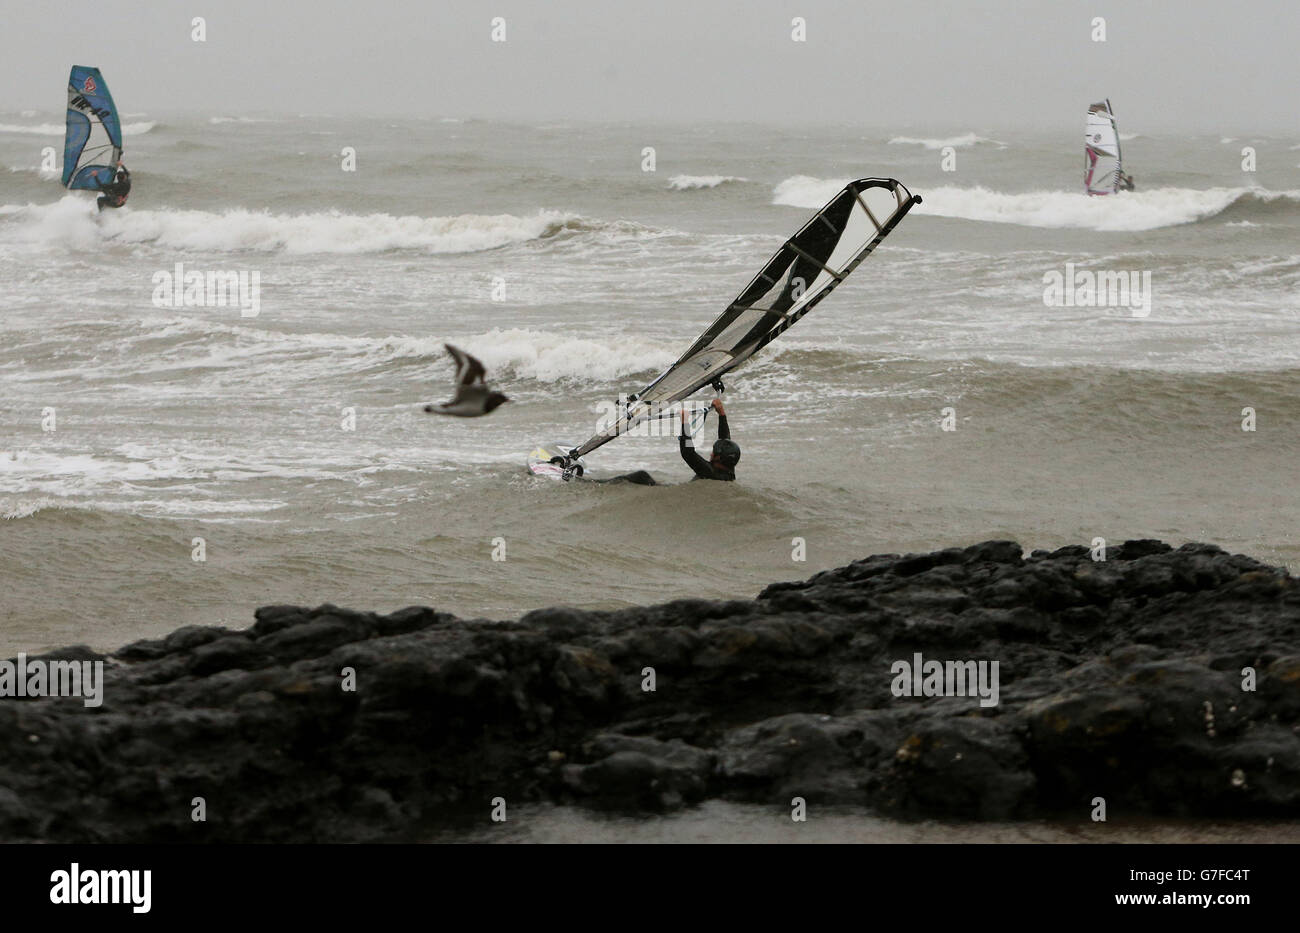 Windsurfers makes the most of the adverse weather conditions in Portmarnock, Dublin. Stock Photo